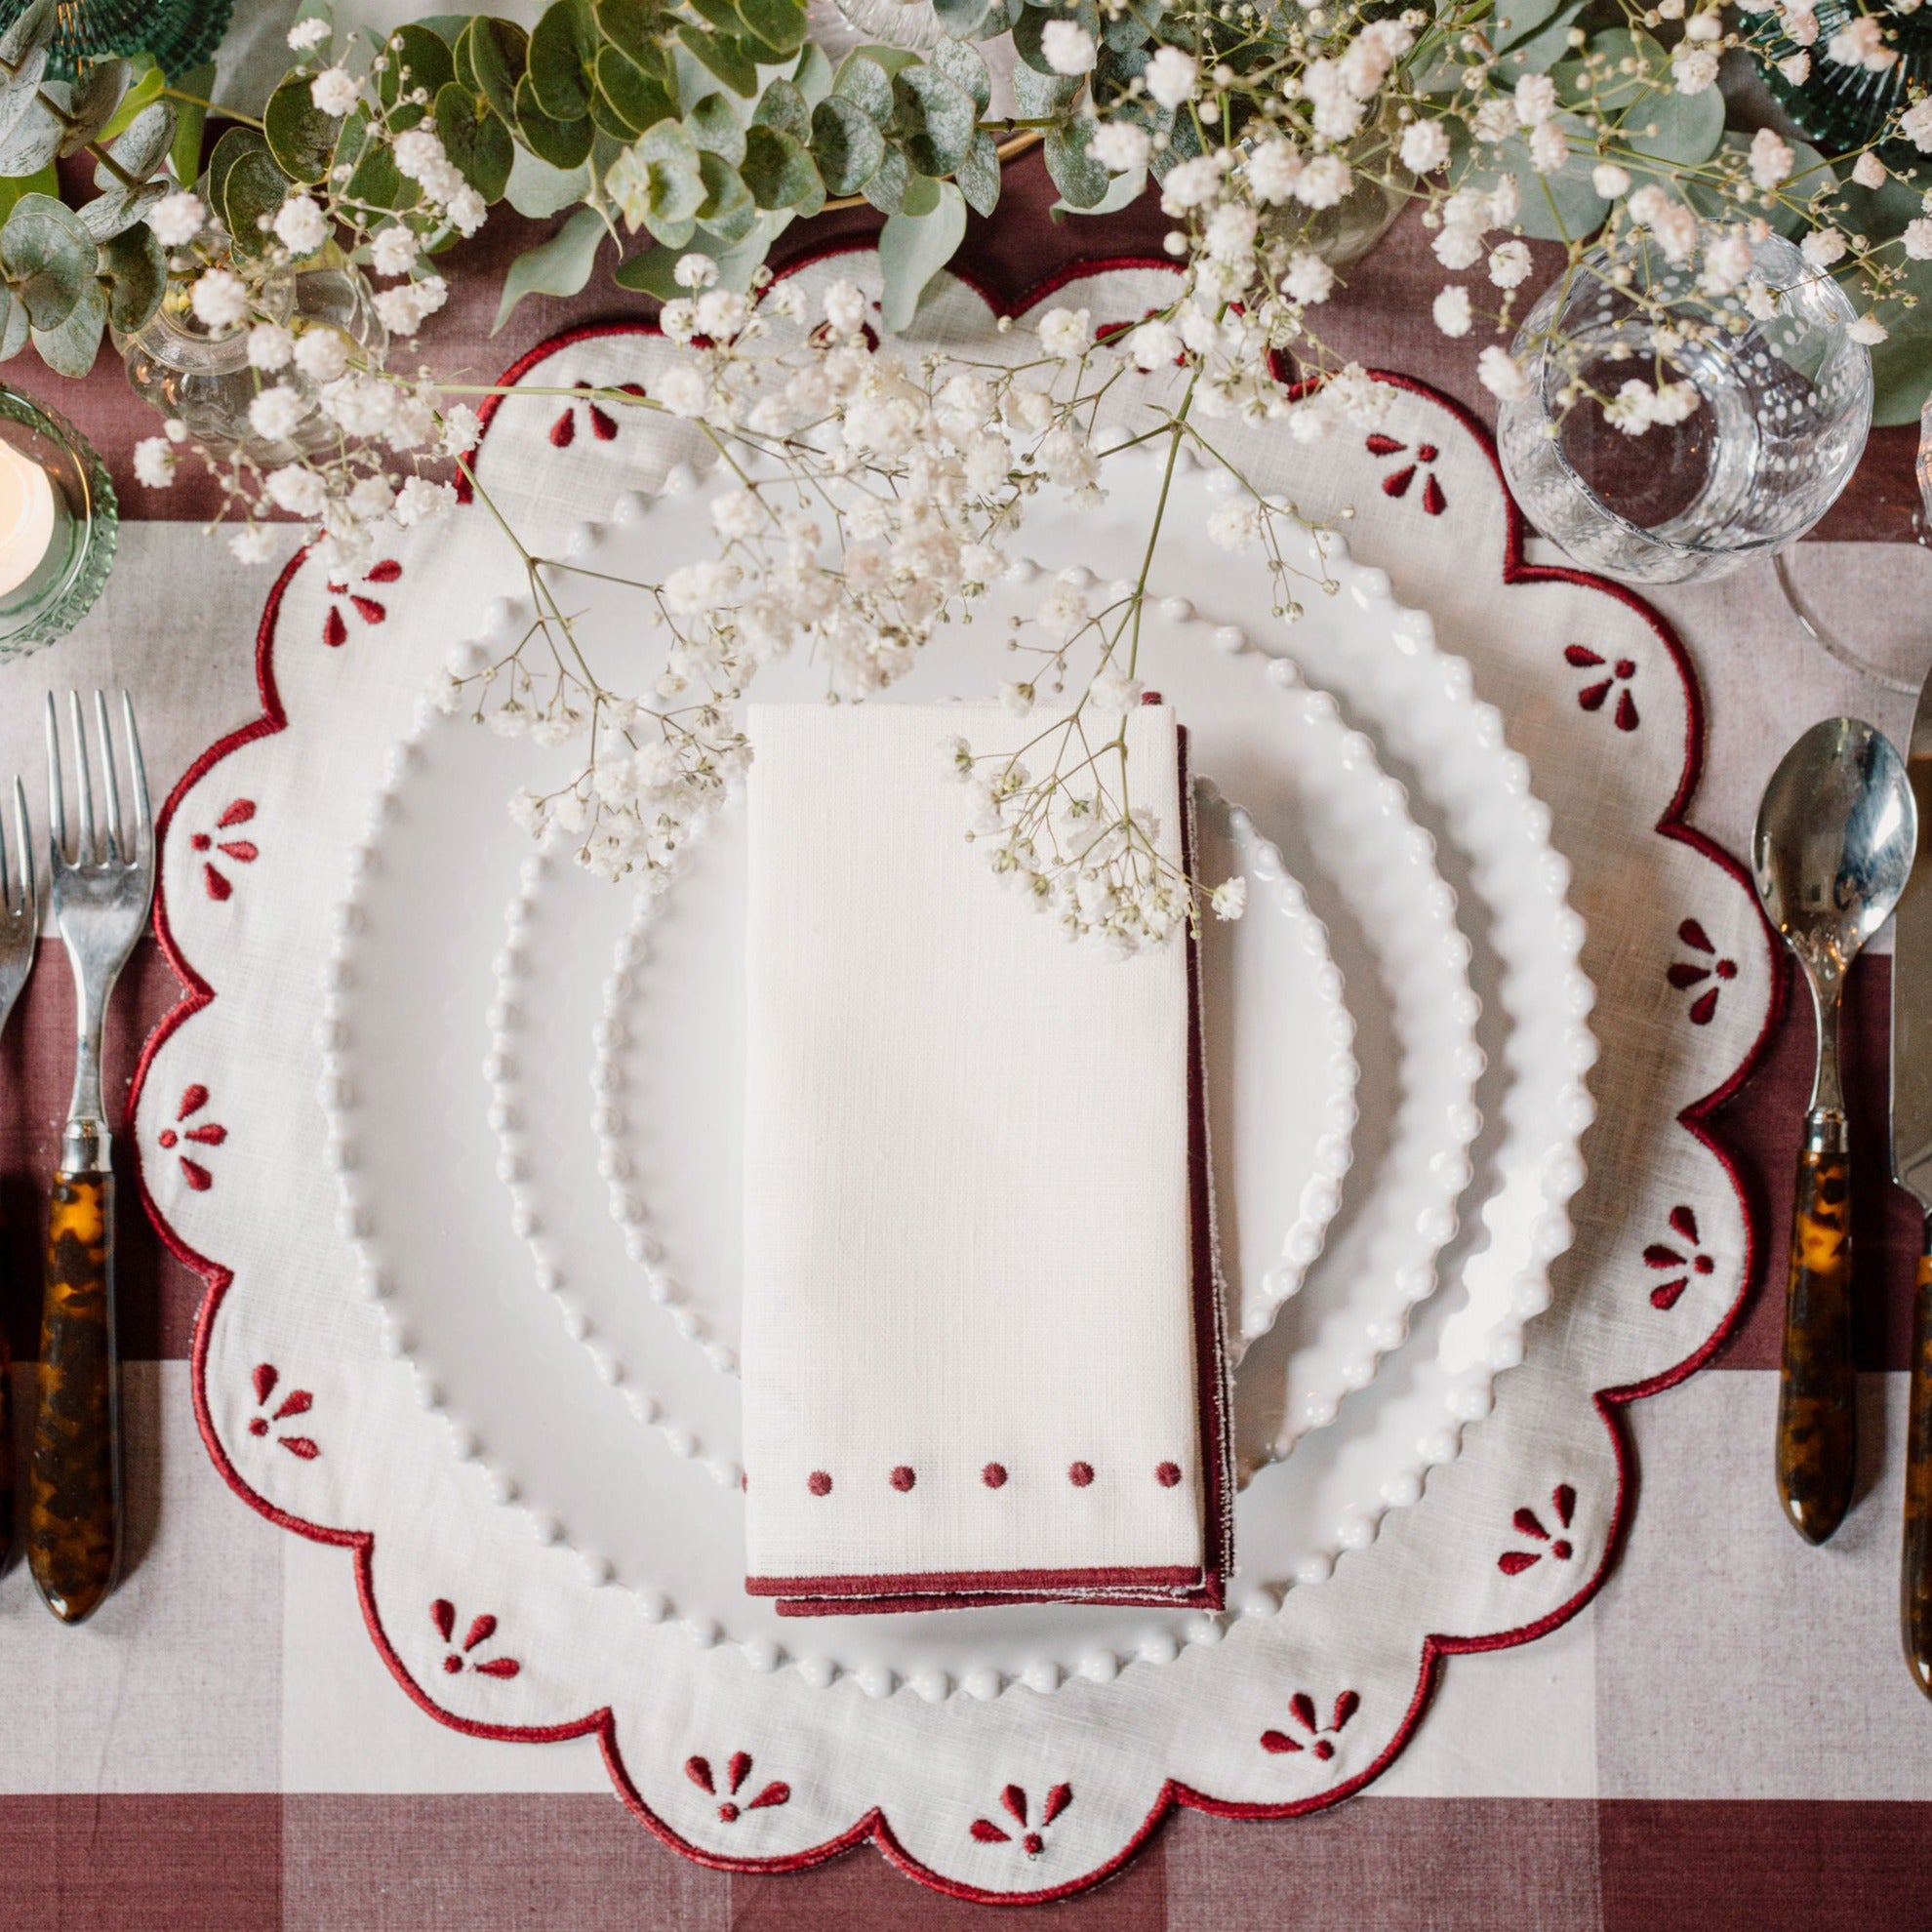 Poppy White and Red Placemats (set of 4)